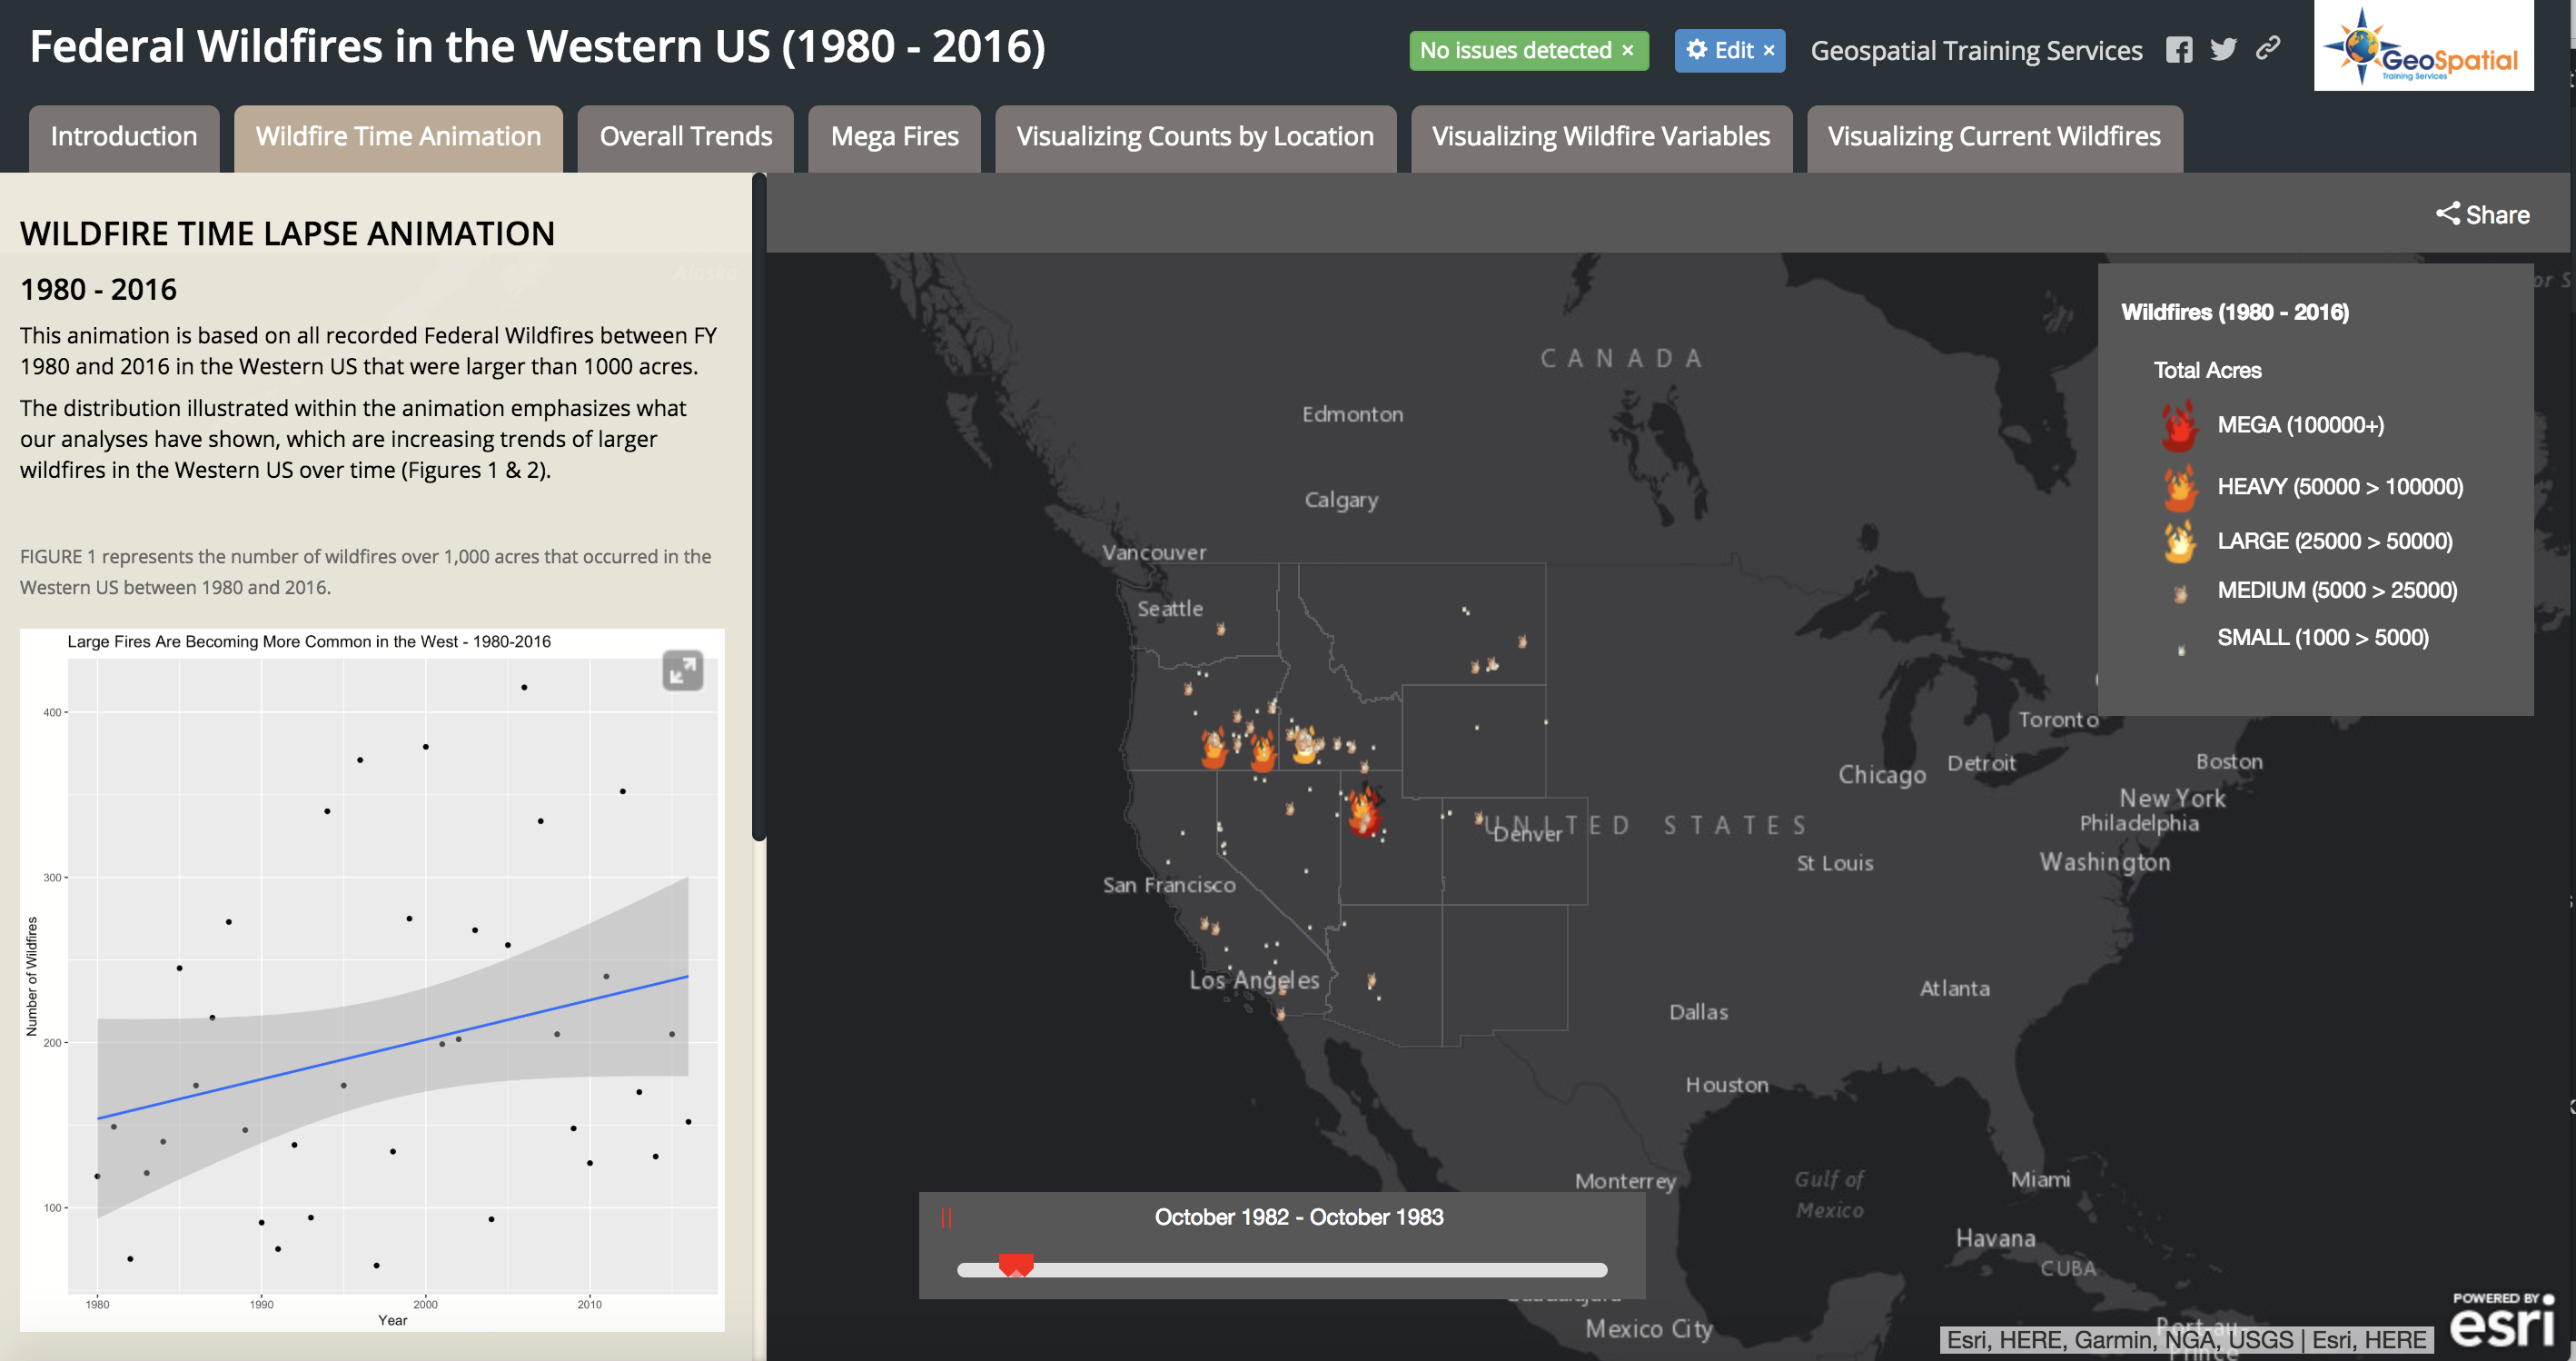 Visualizing Historical Wildfire Information in a Story Map